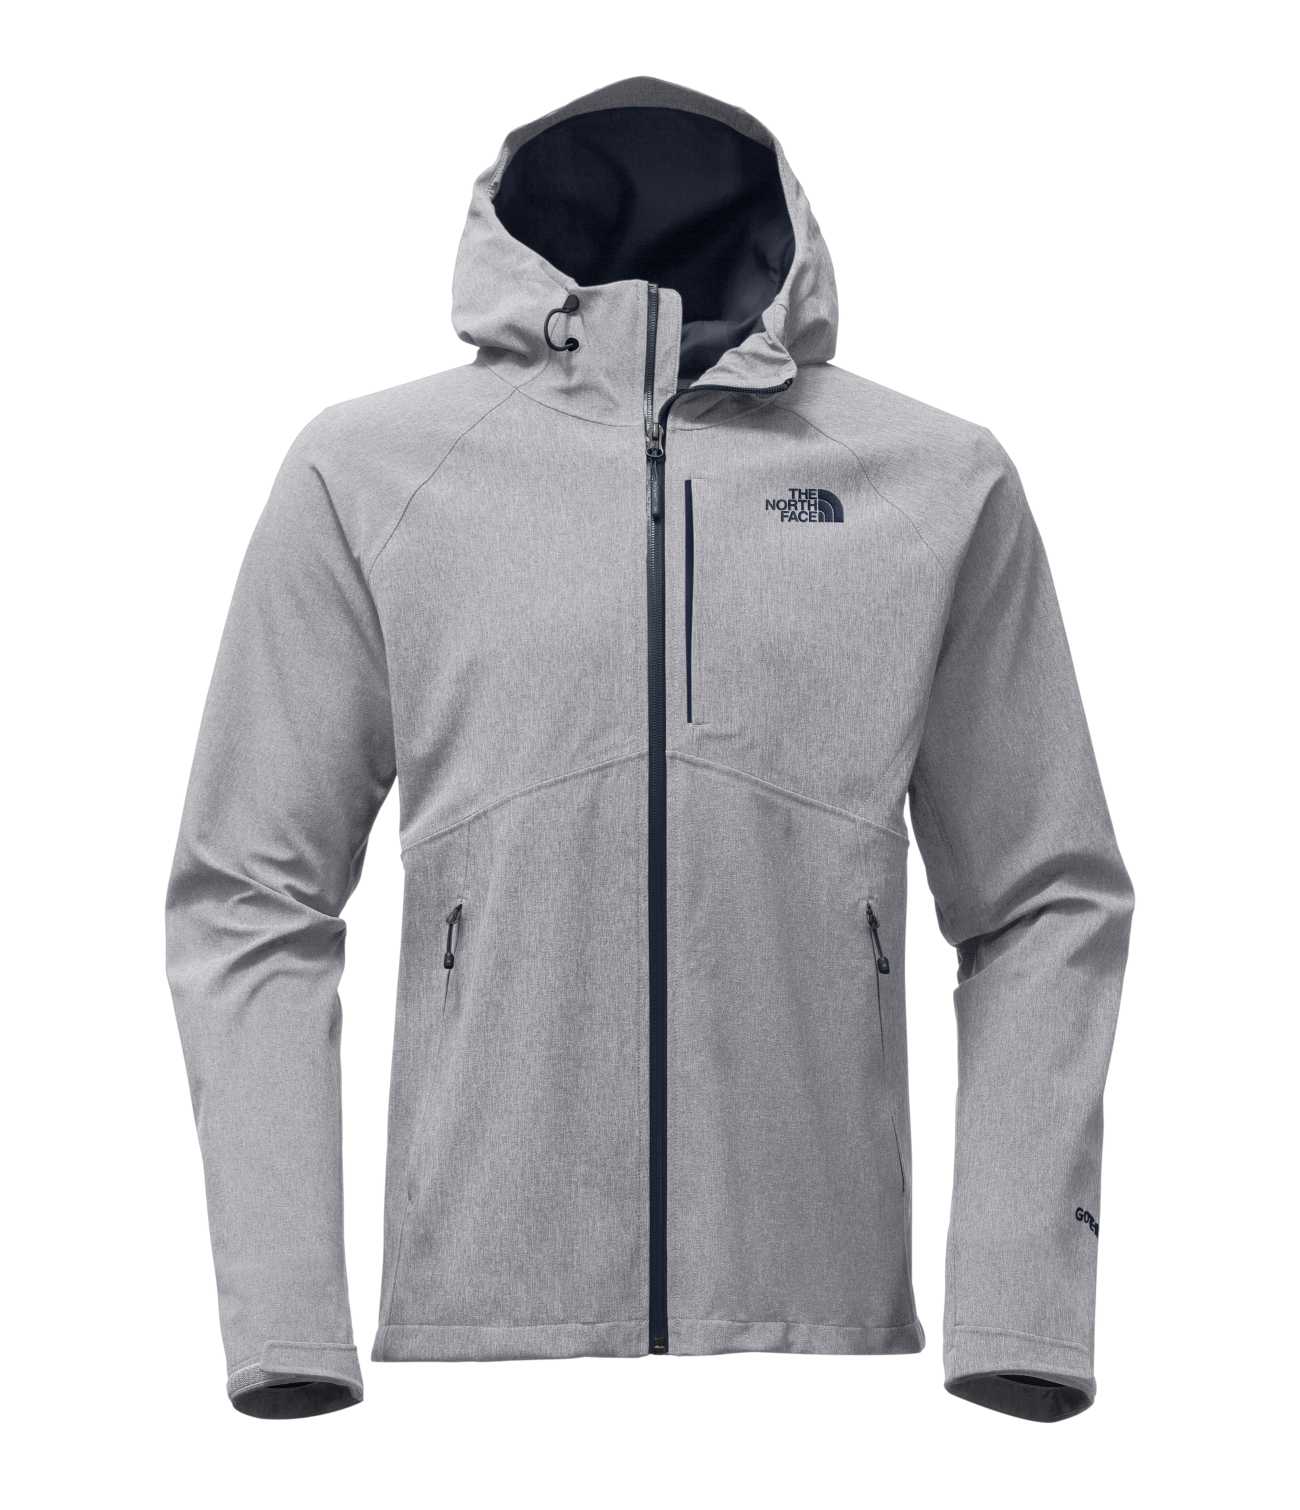 MEN'S APEX FLEX GTX JACKET | The North Face | The North Face Renewed